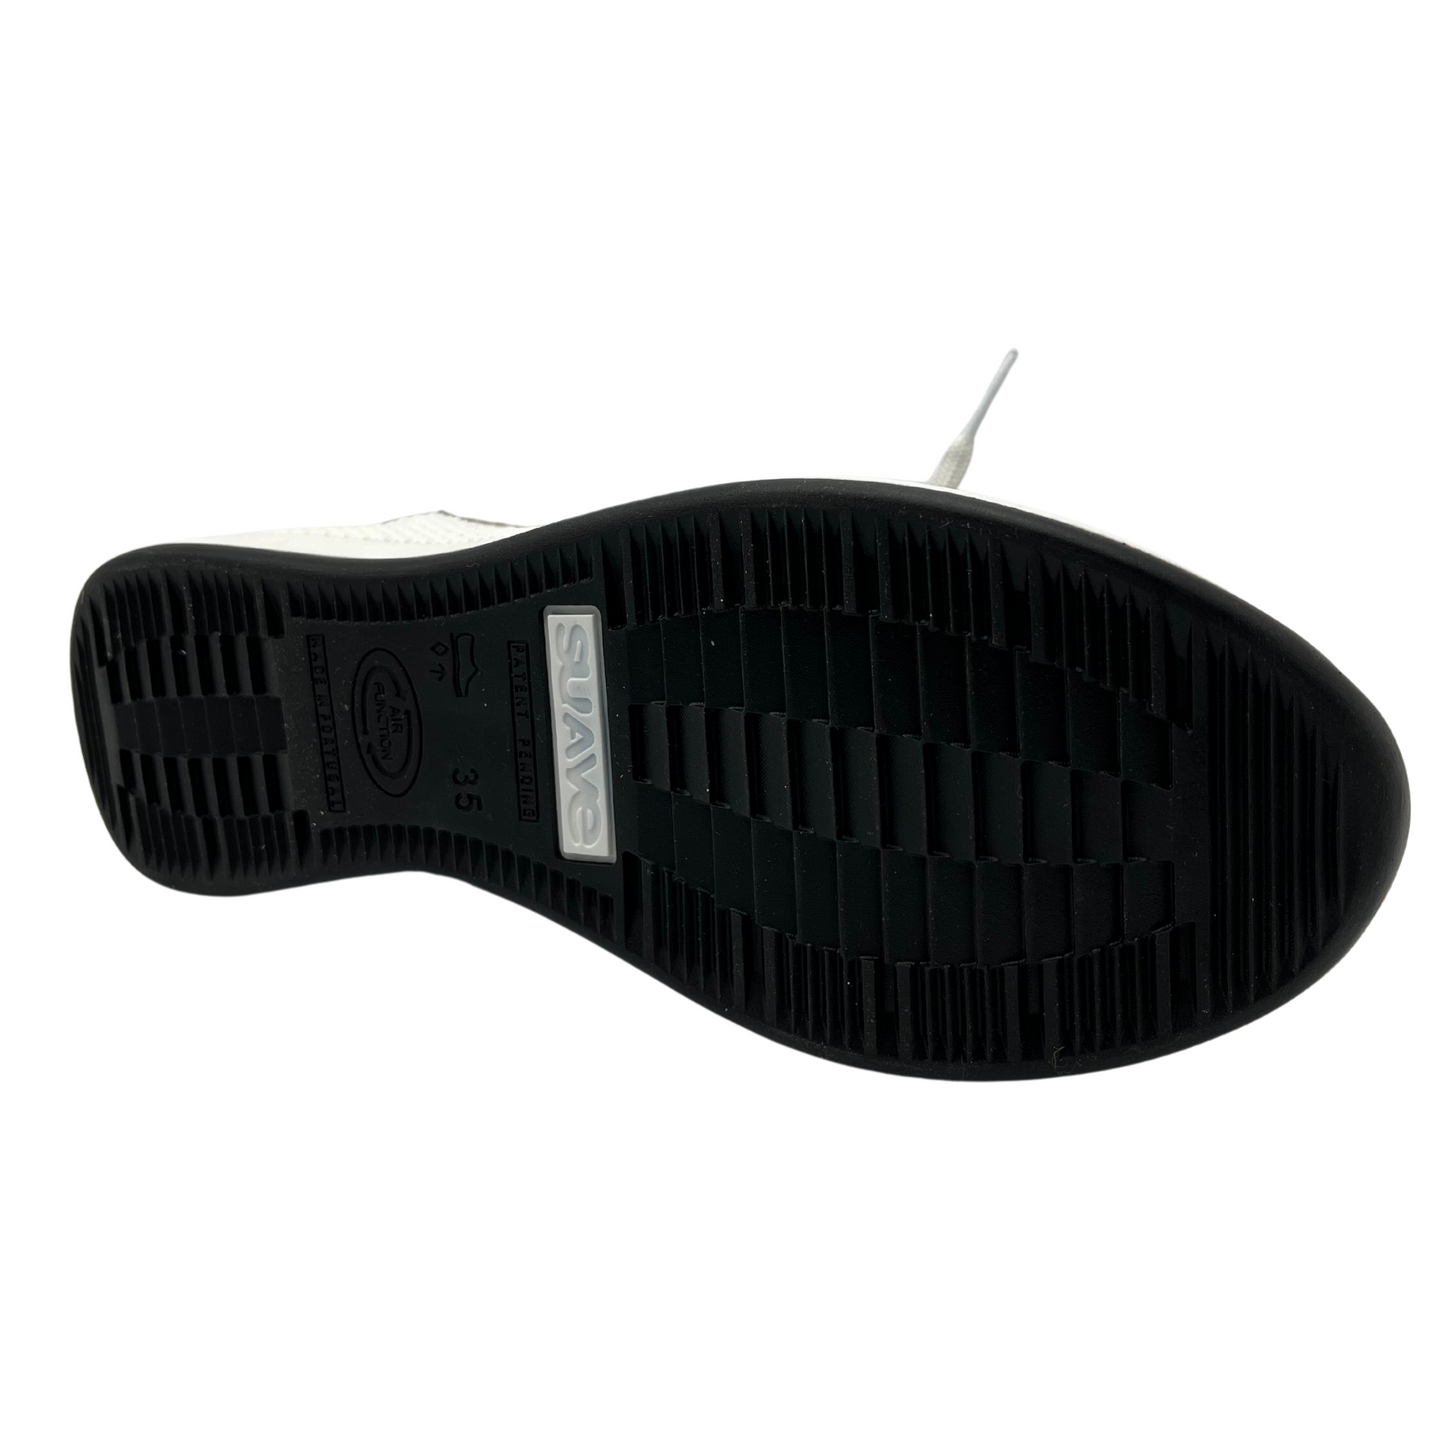 Bottom view of women's wedge sneaker with black and white rubber outsole